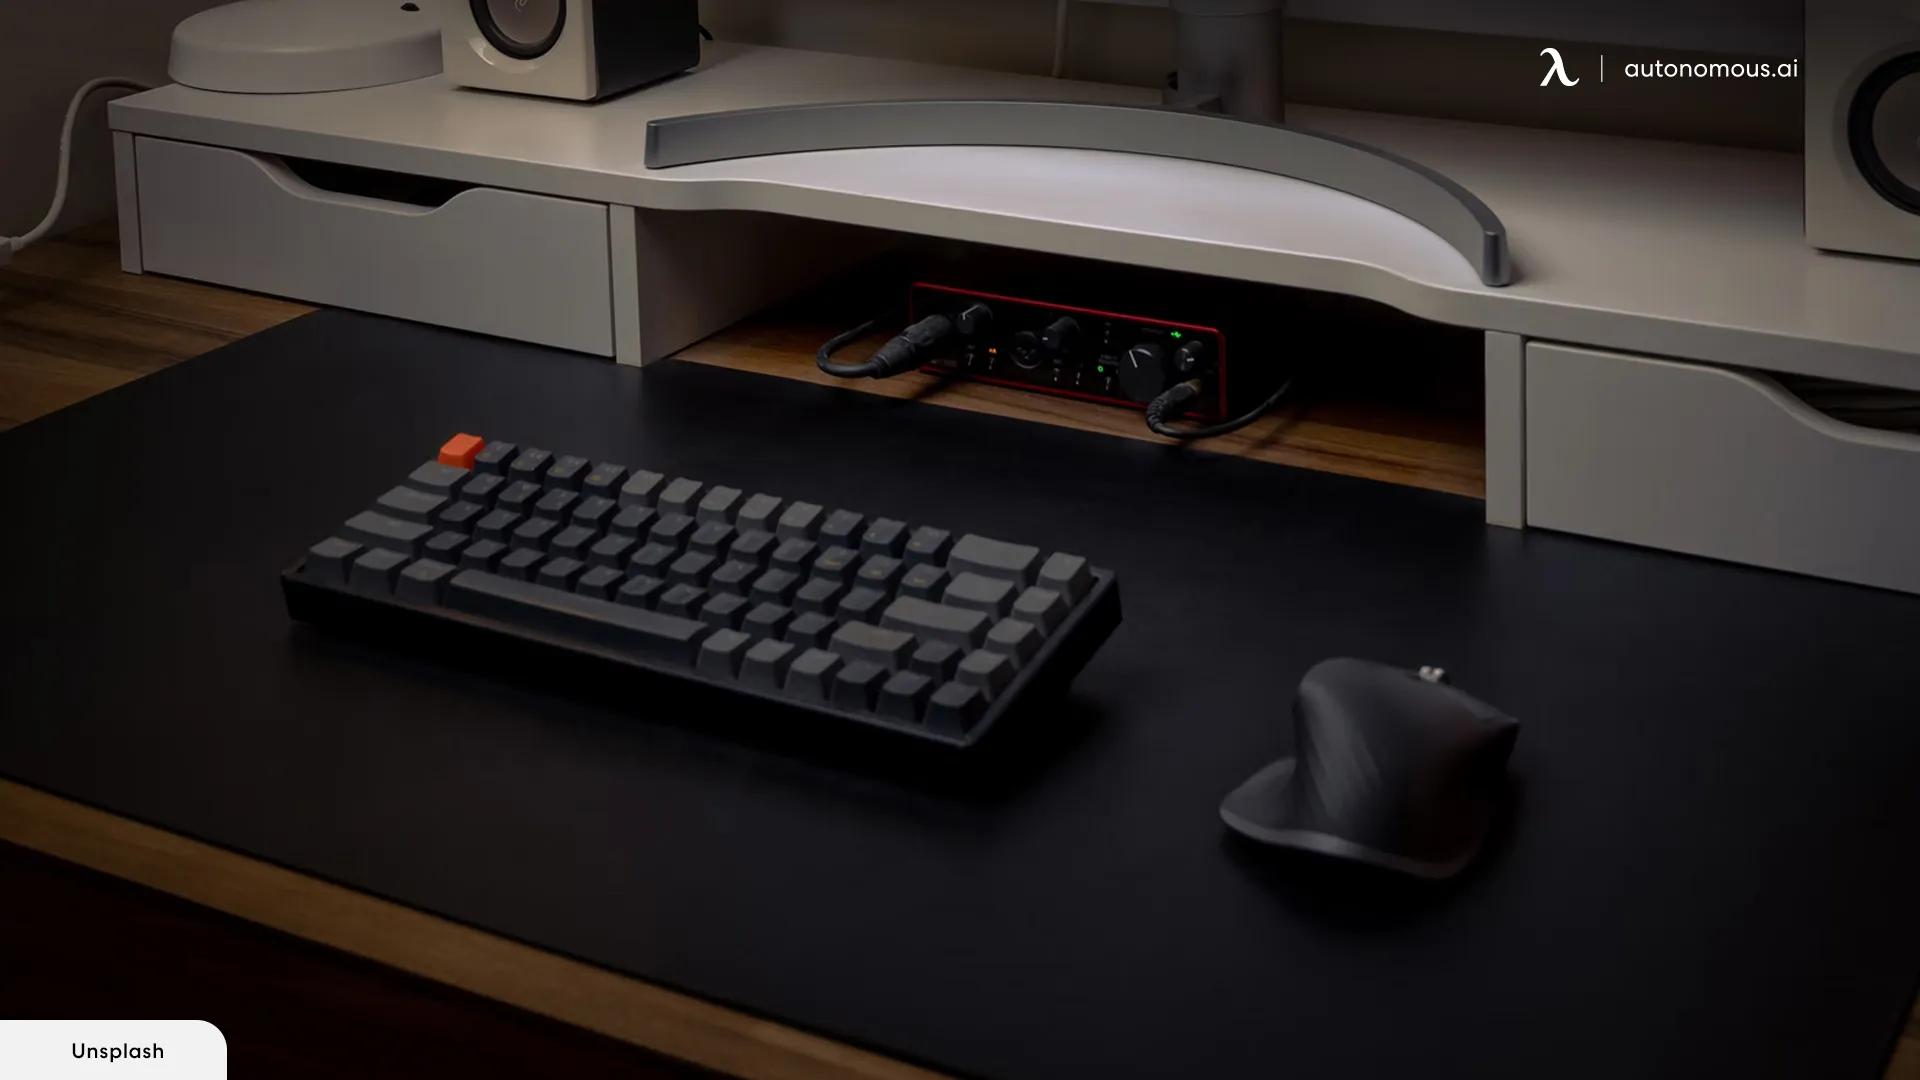 Consider Going for Wireless Keyboards and Mice